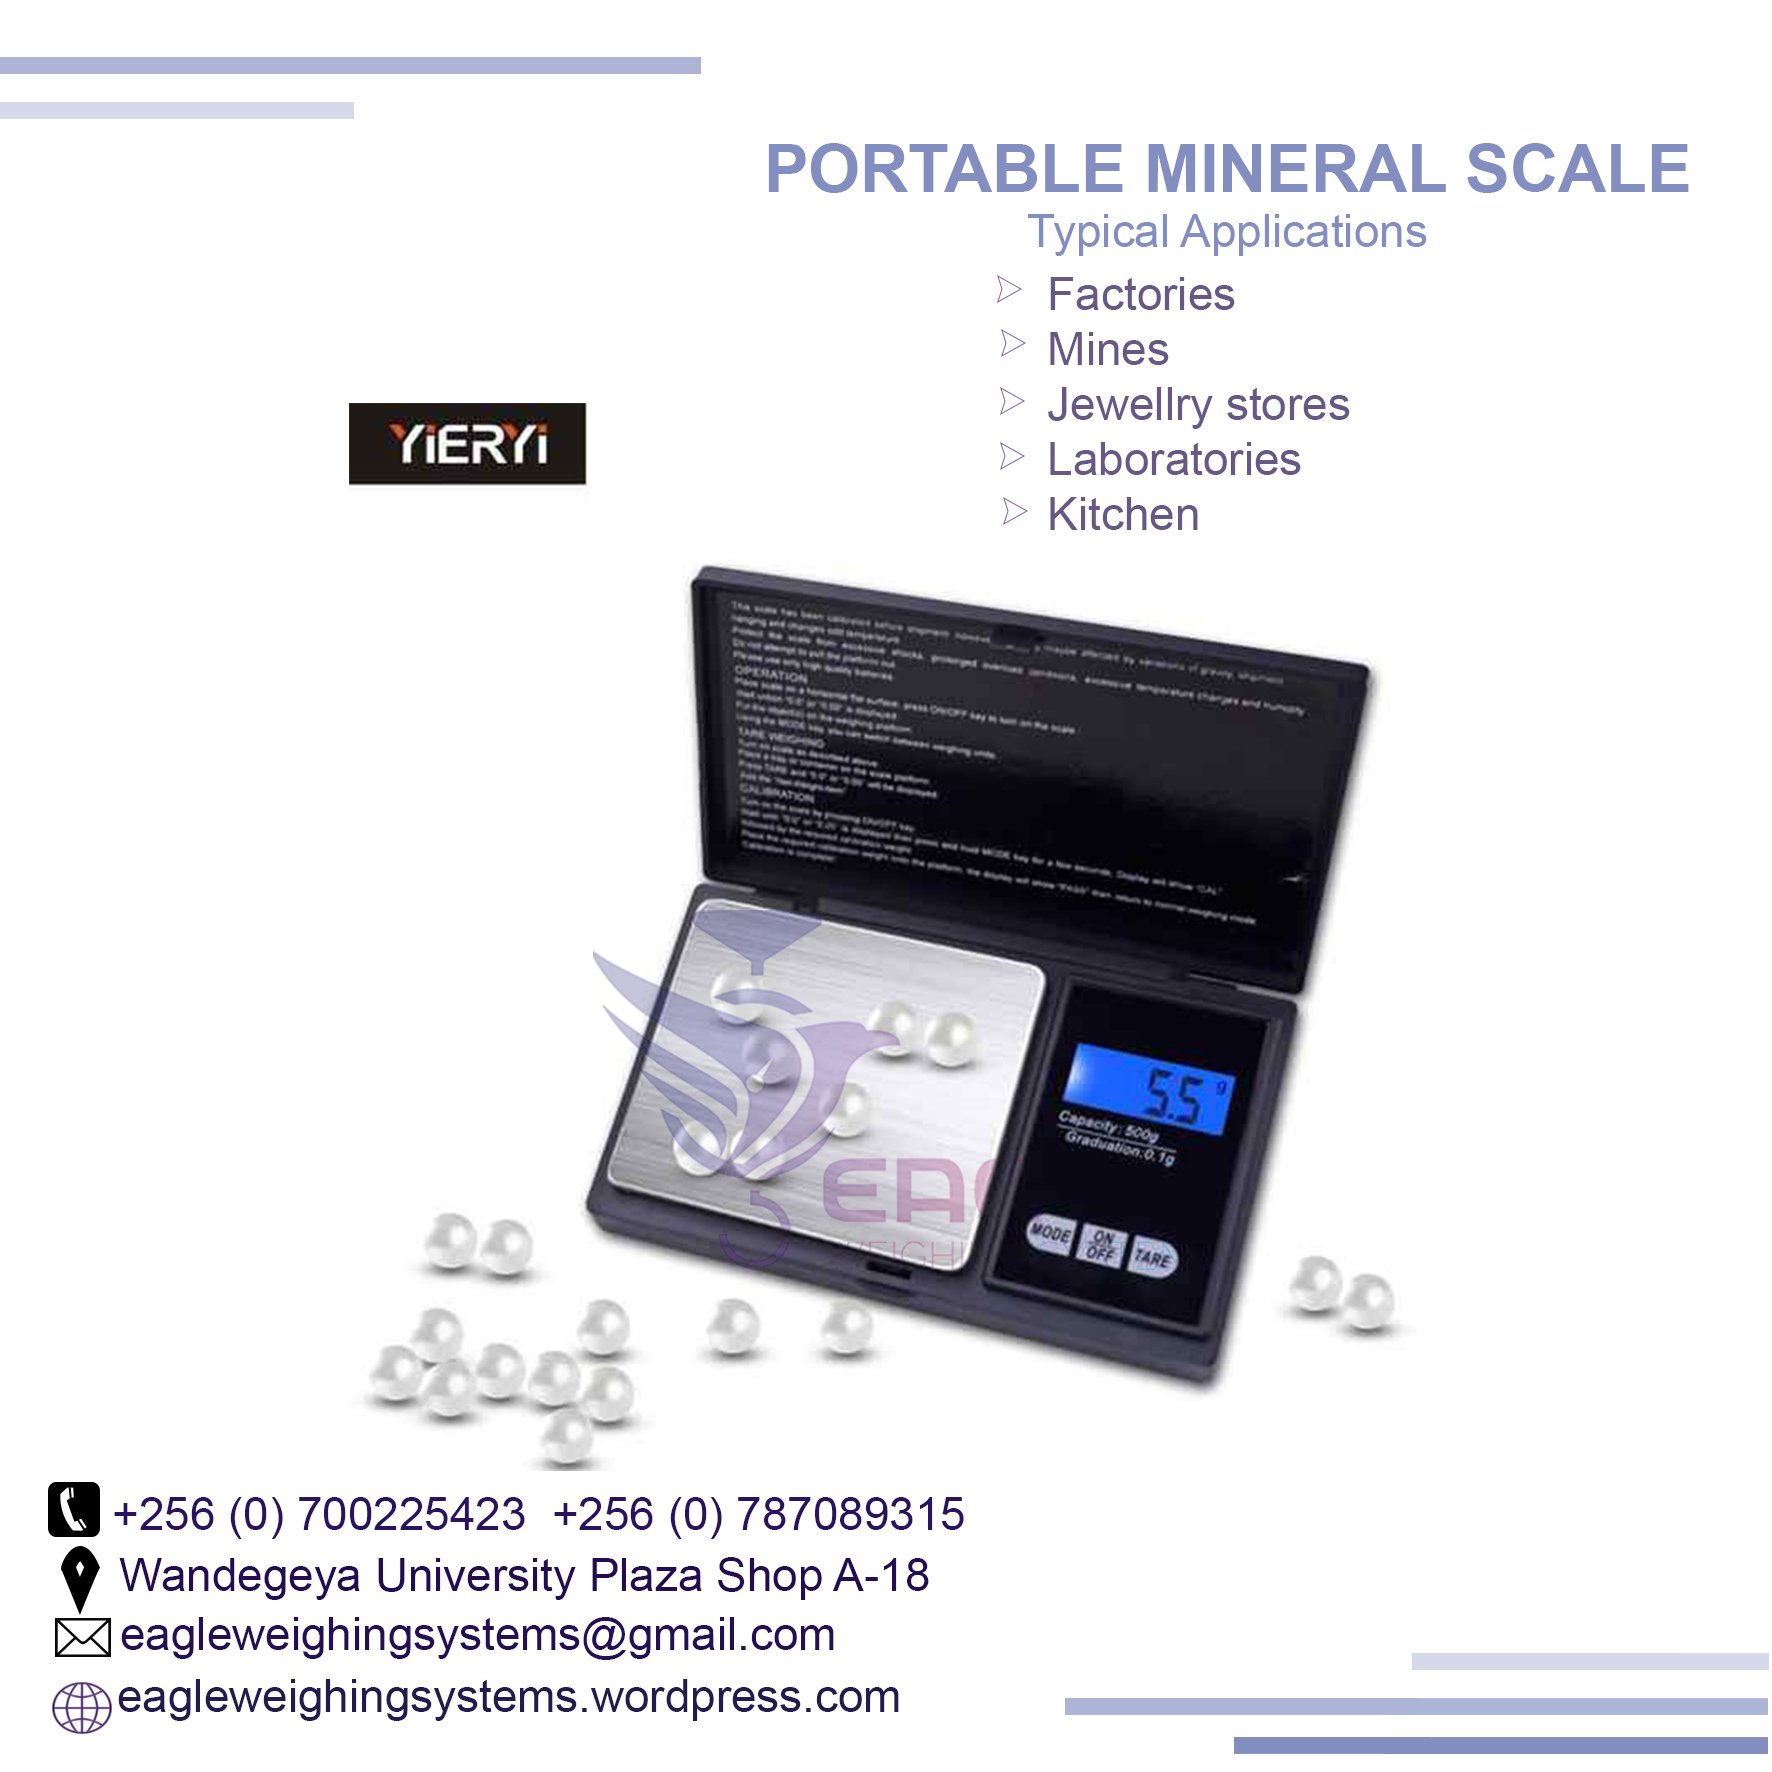 Accurate Portable mineral, jewelry digital table Table Top scales in Kampala, Kampala Central Division, Central, Uganda